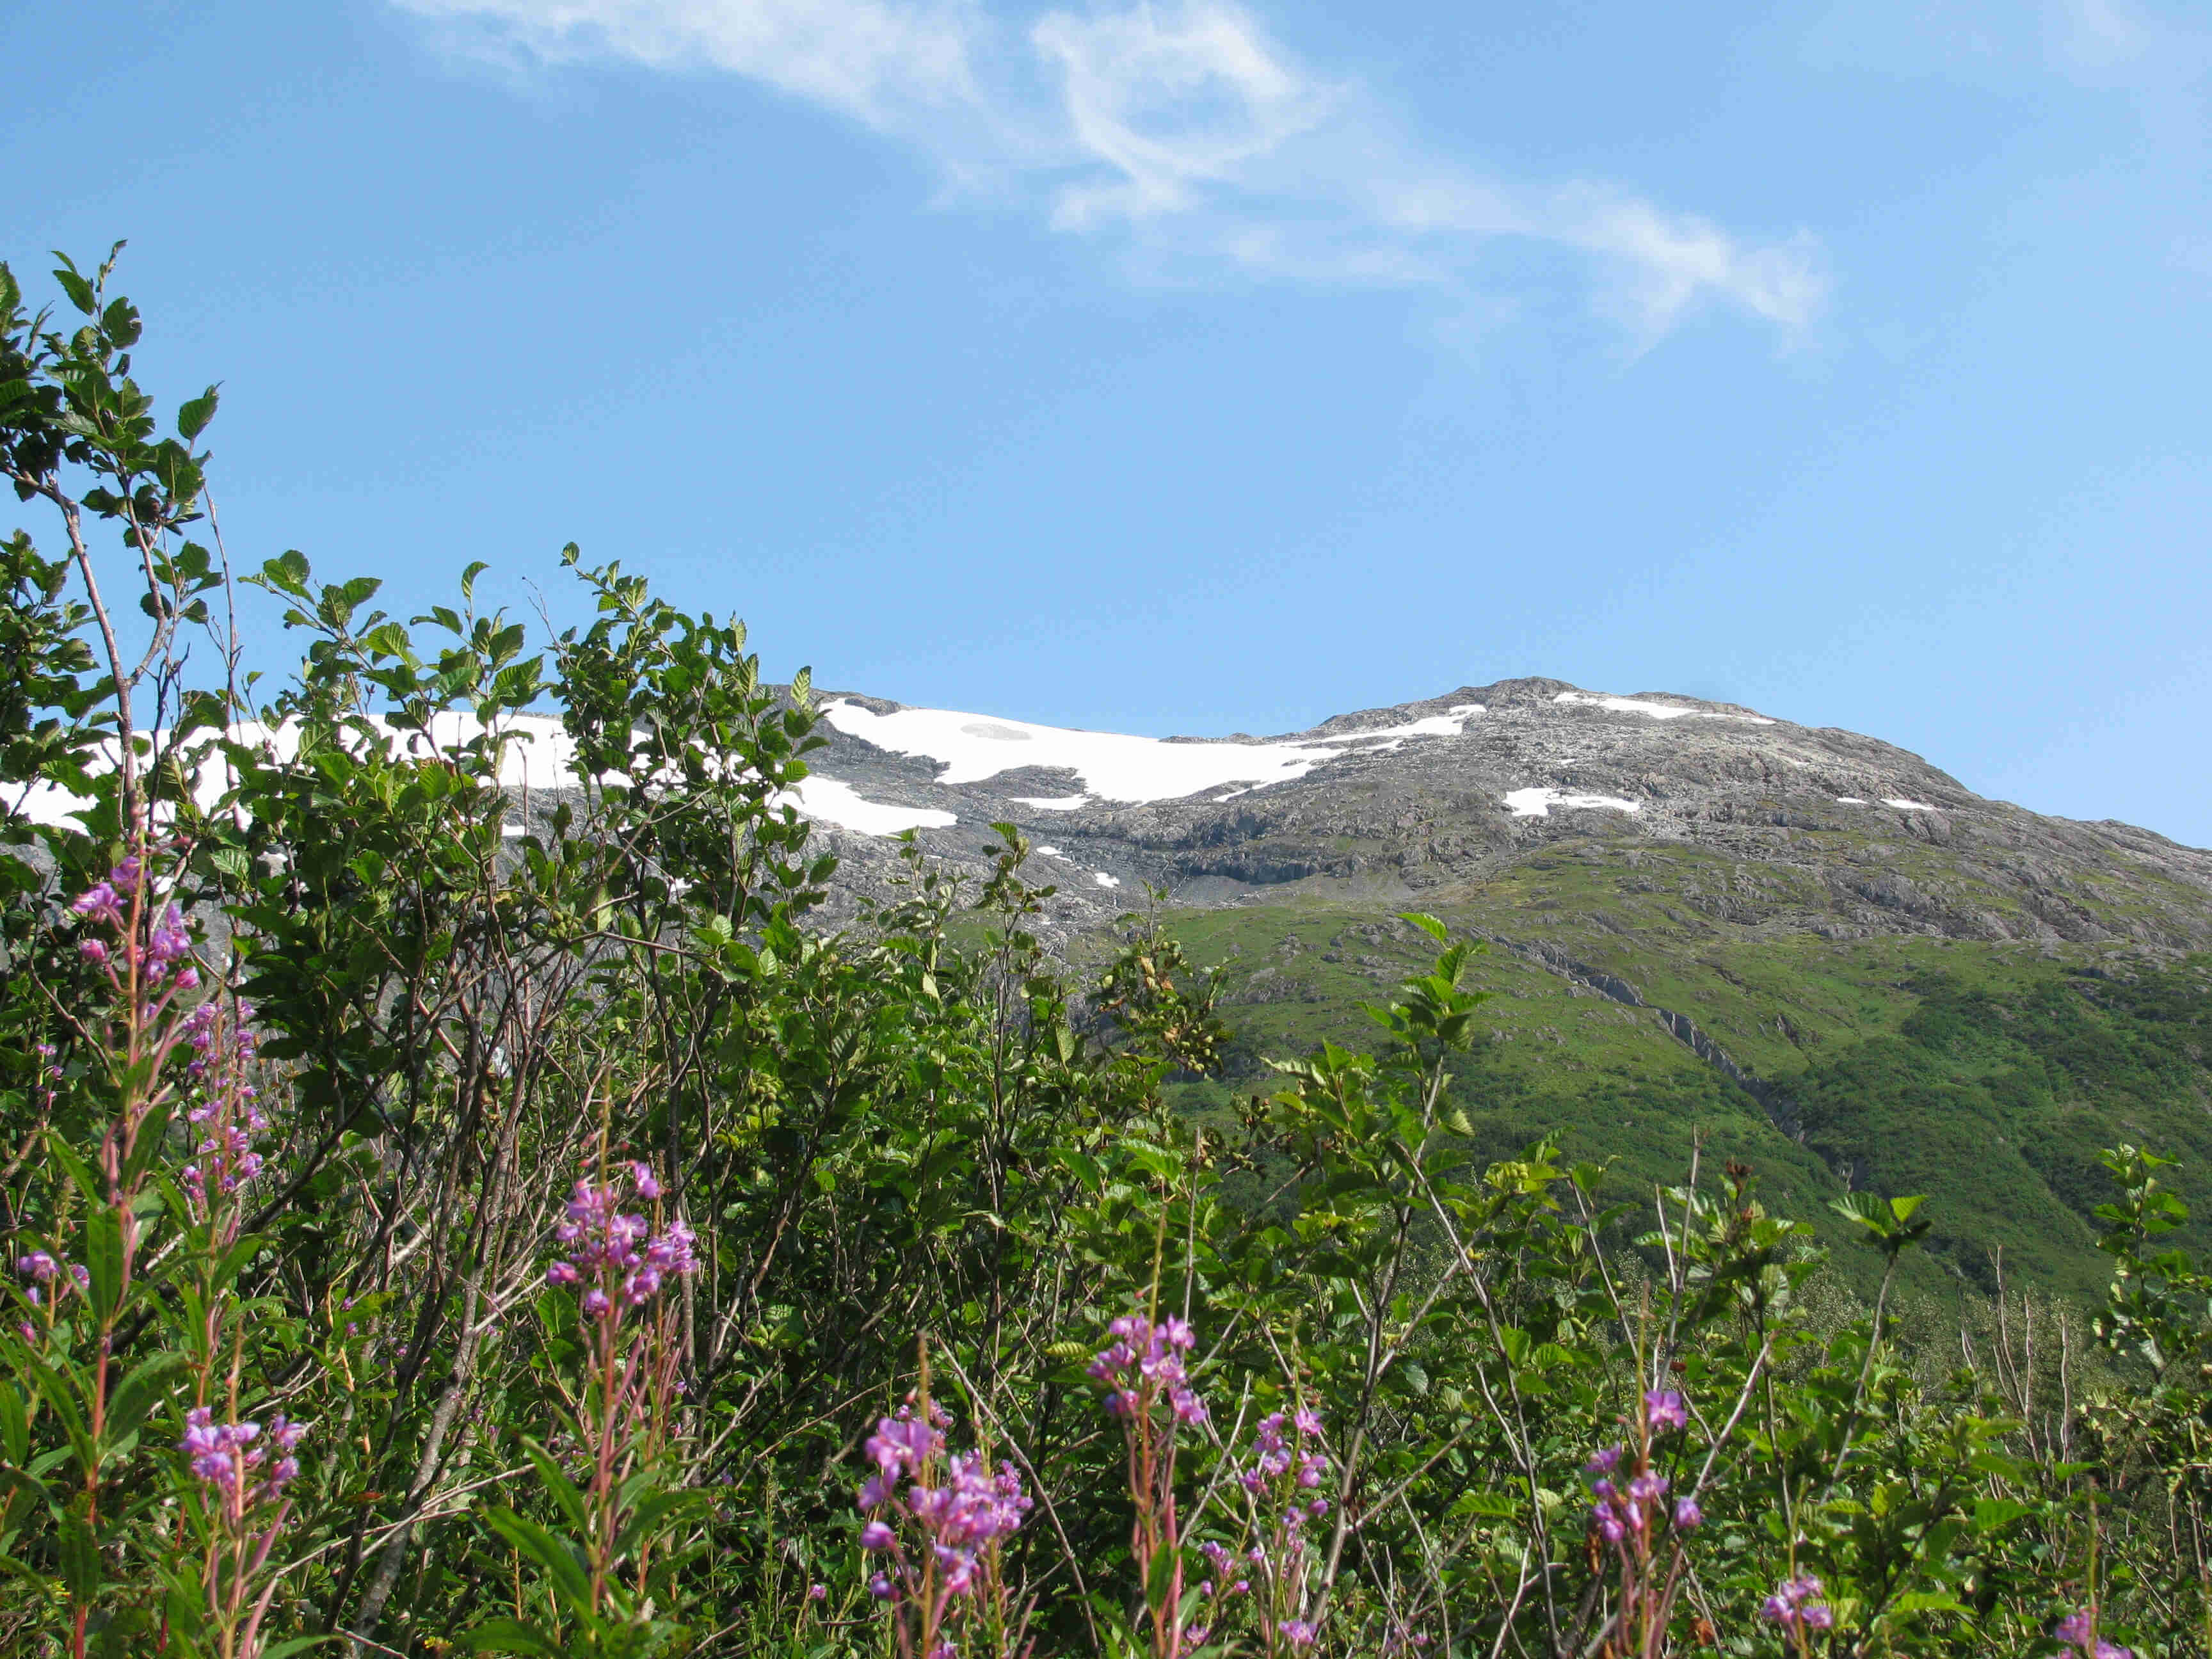 Green brush and purple flowers, and a mountain with a little snow on top, in the background